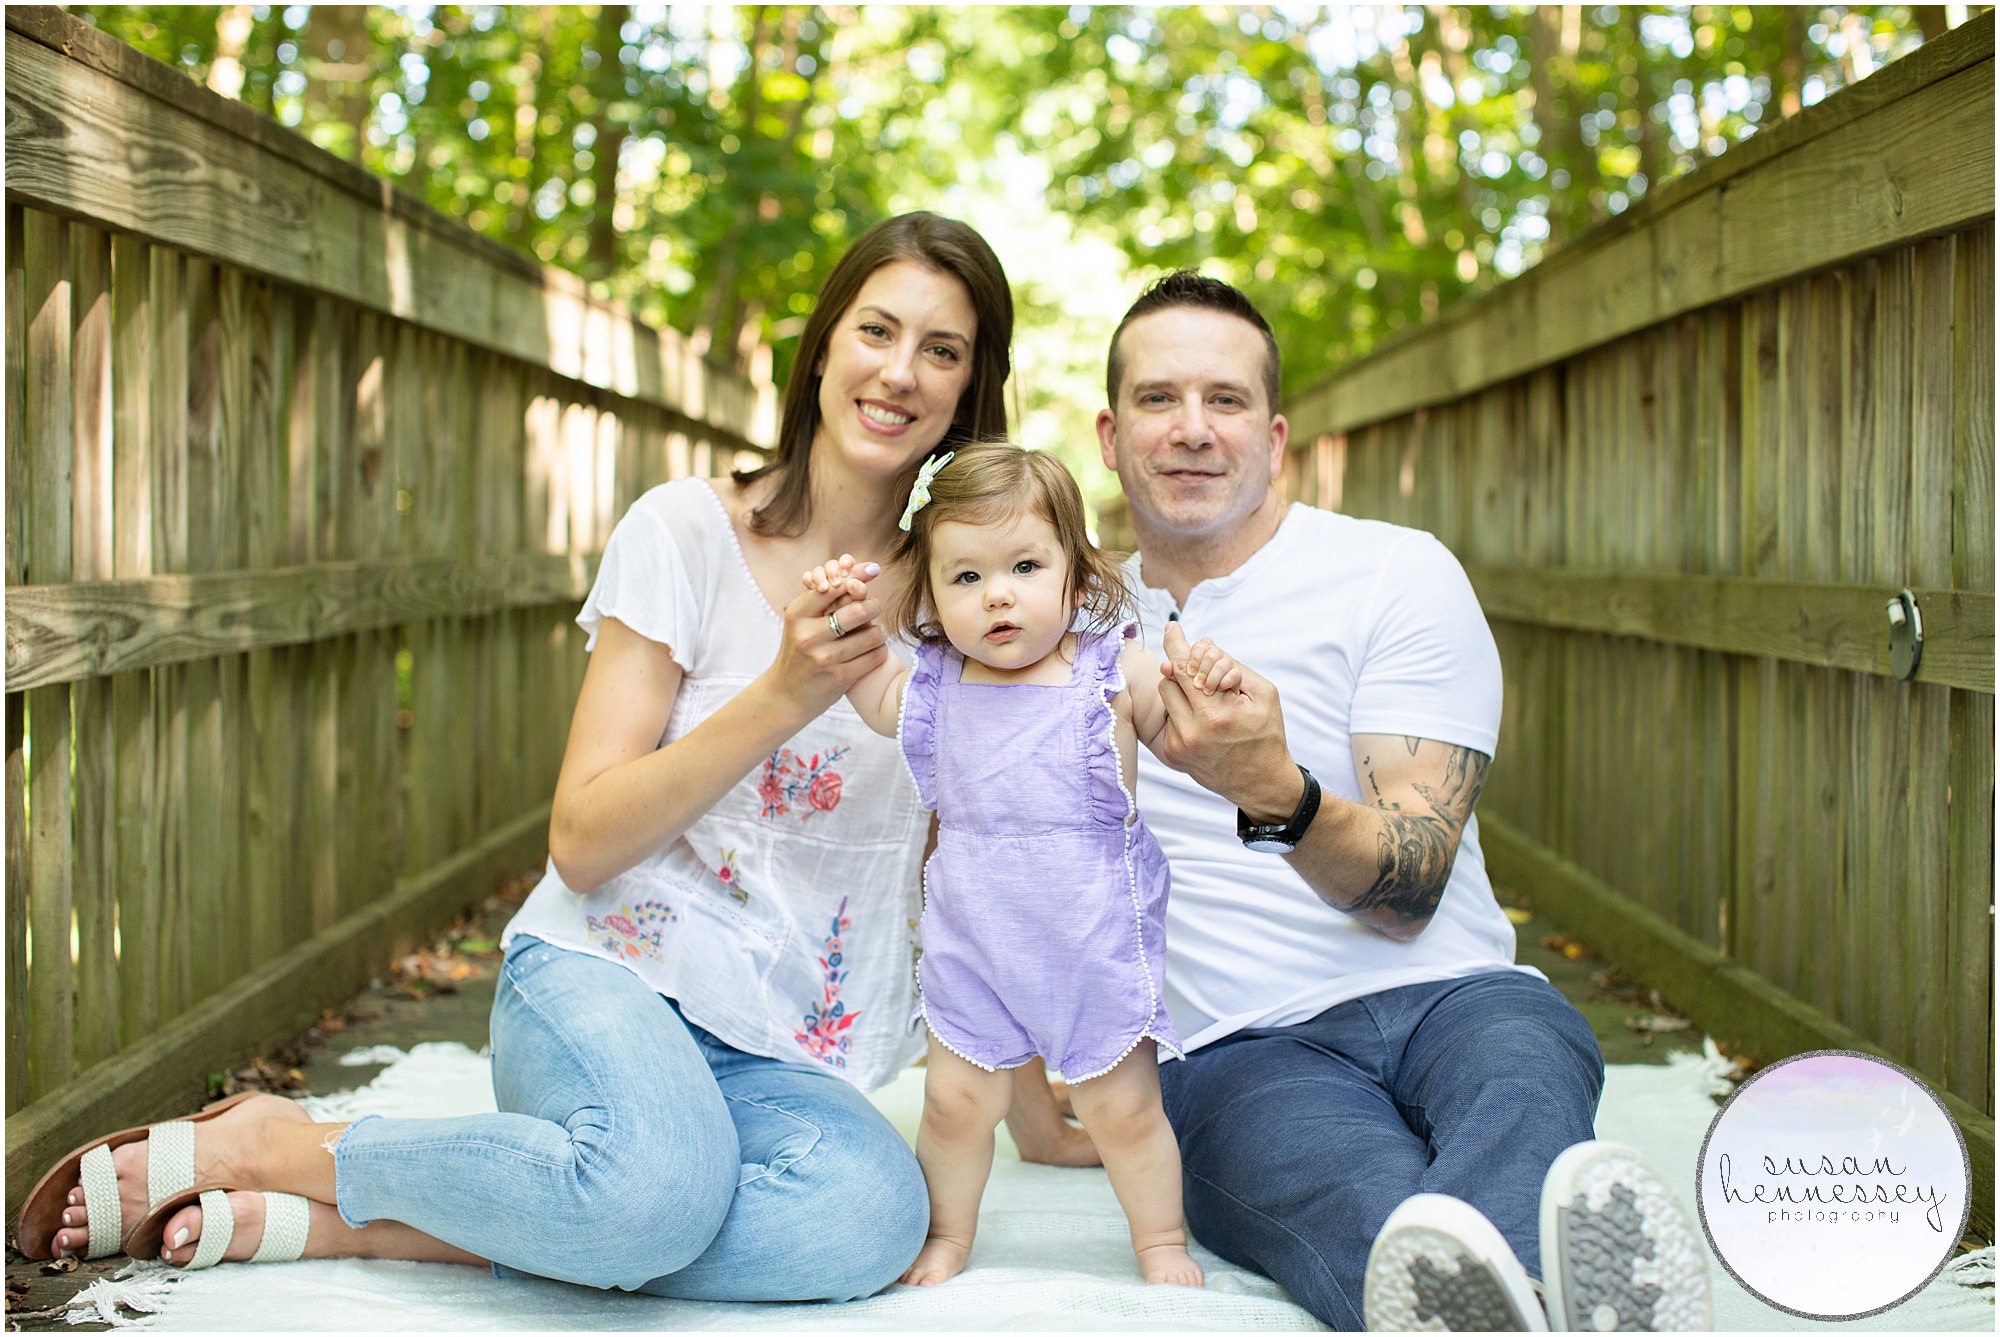 Family photos for baby girl's first birthday